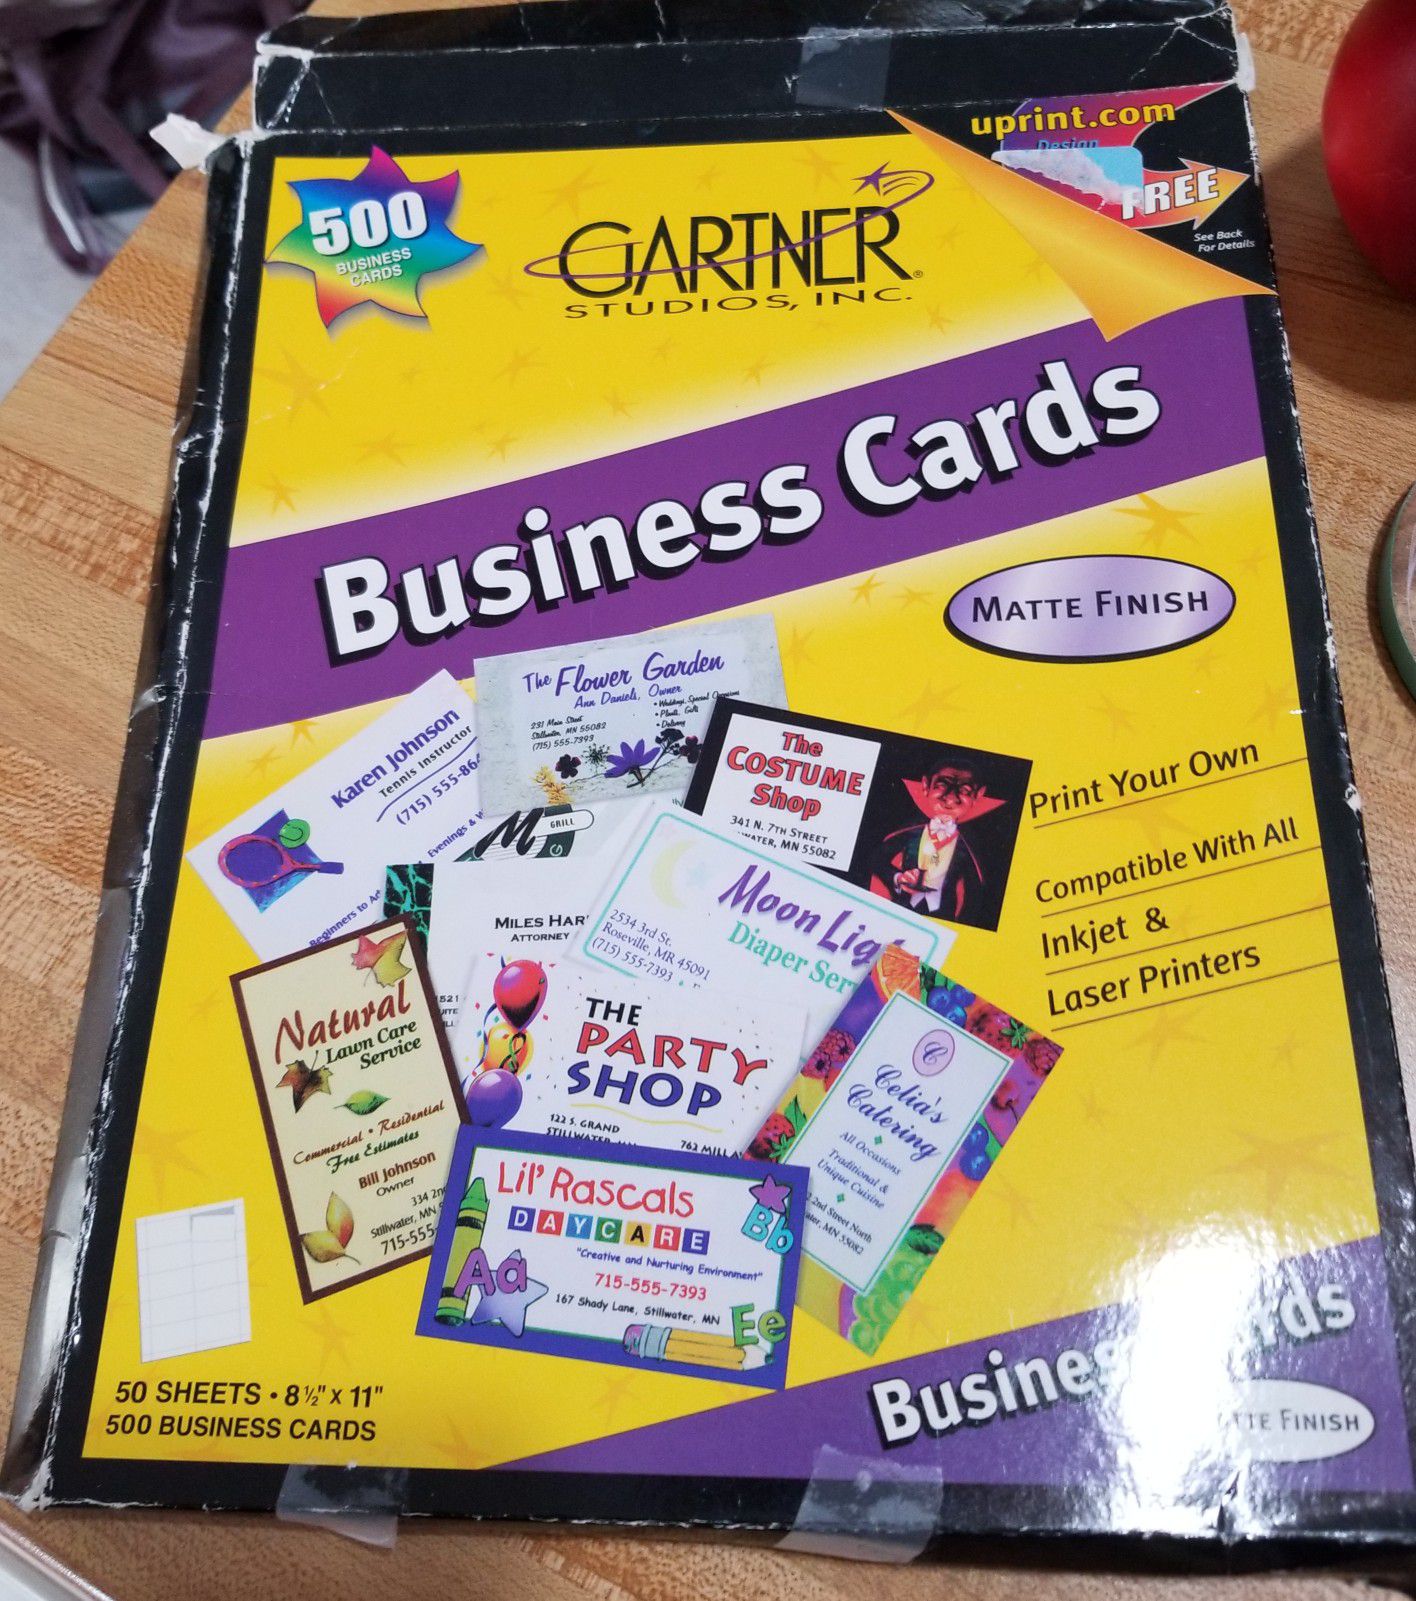 18 sheets of business labels for printing